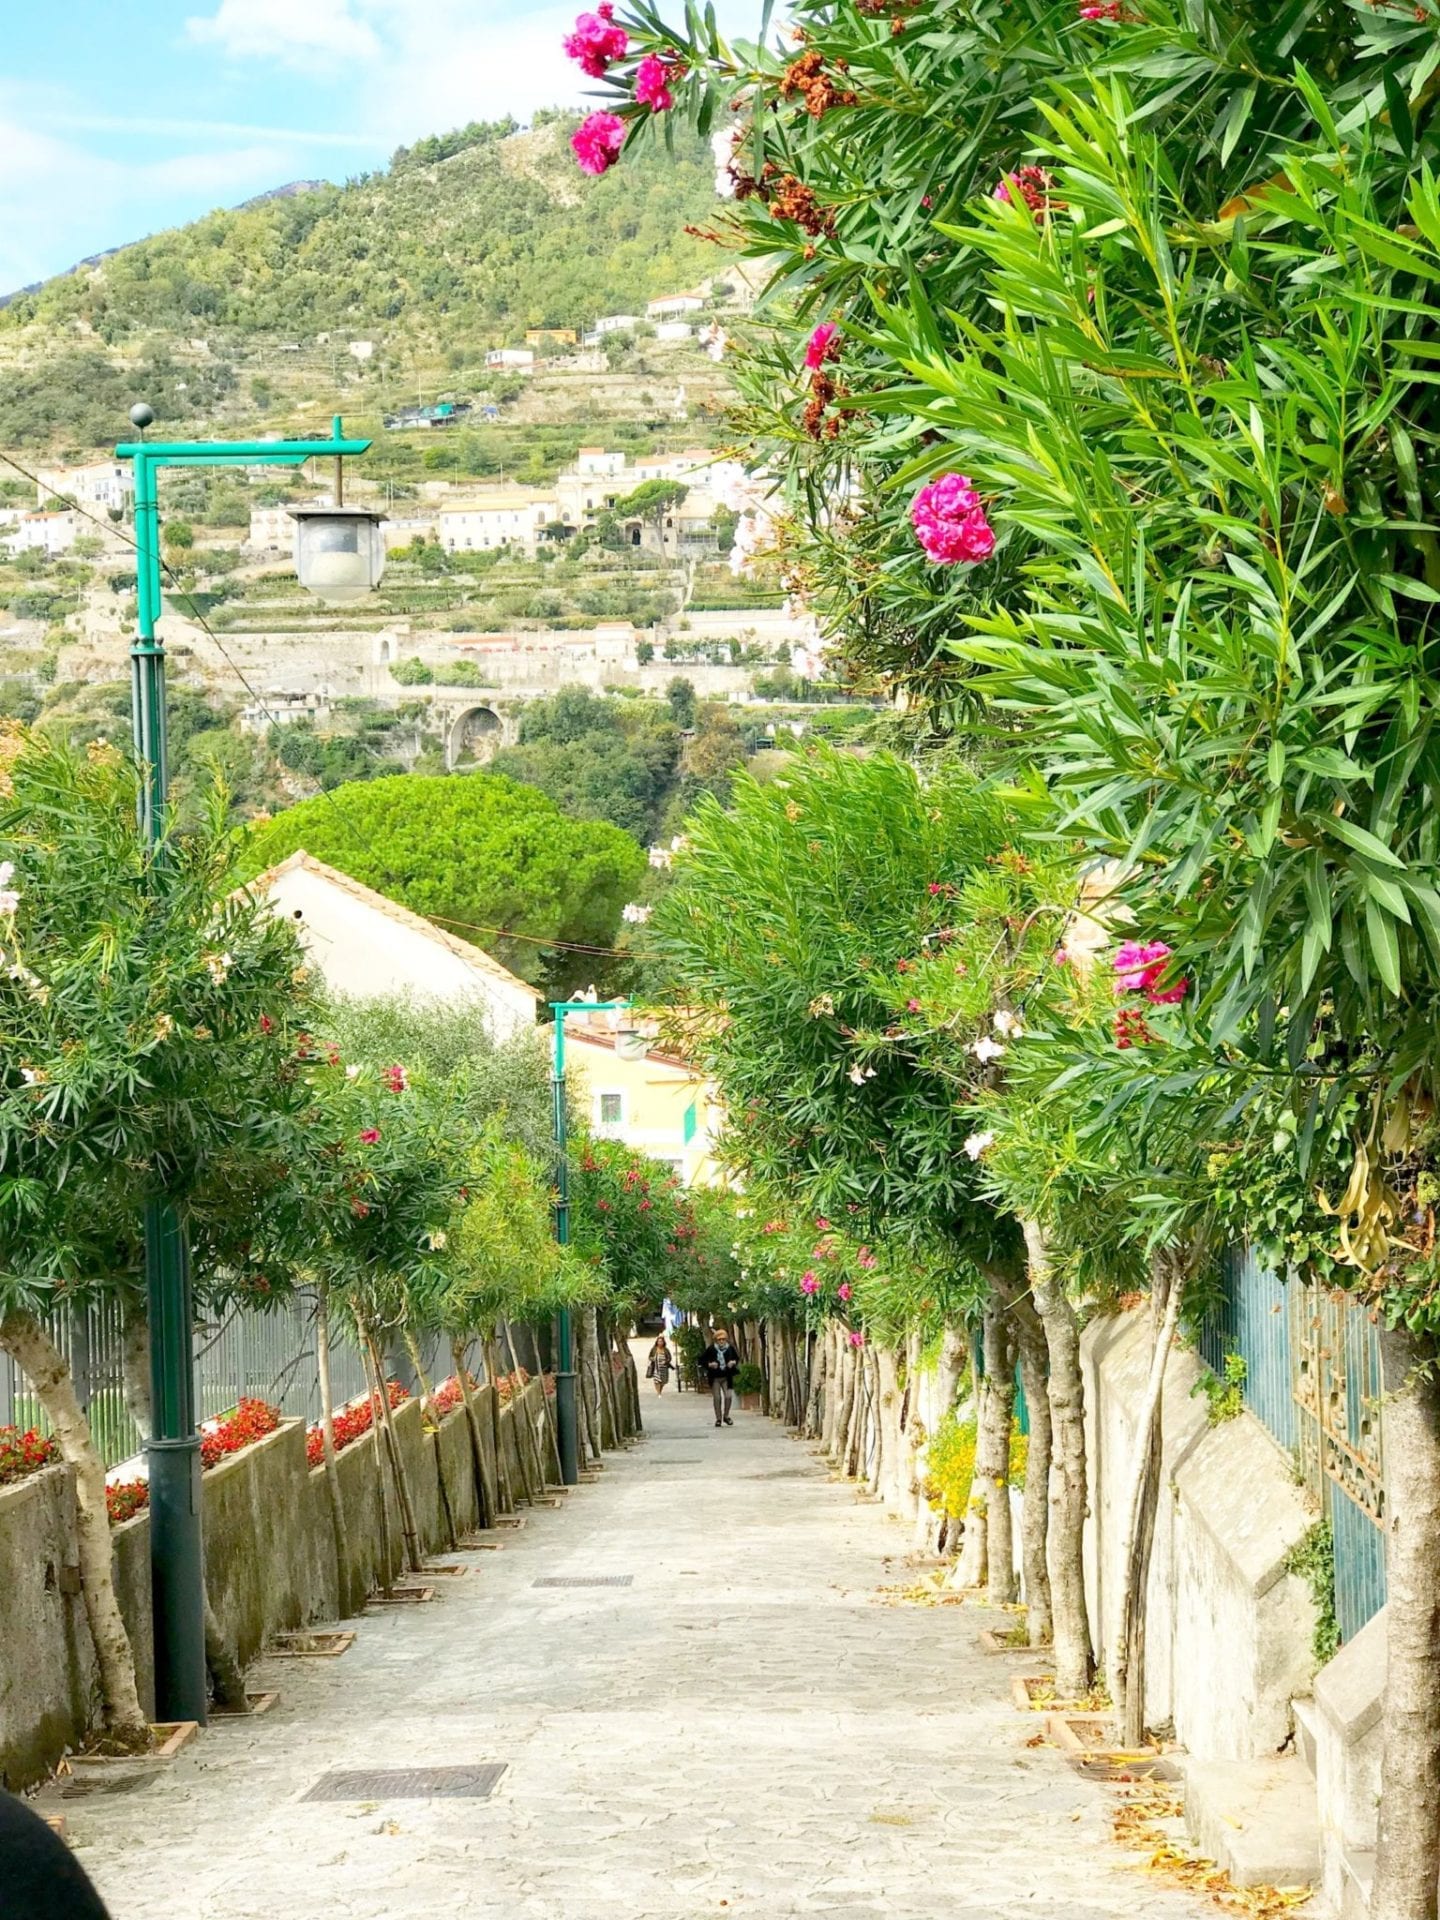 Advice for planning a trip to Ravello.